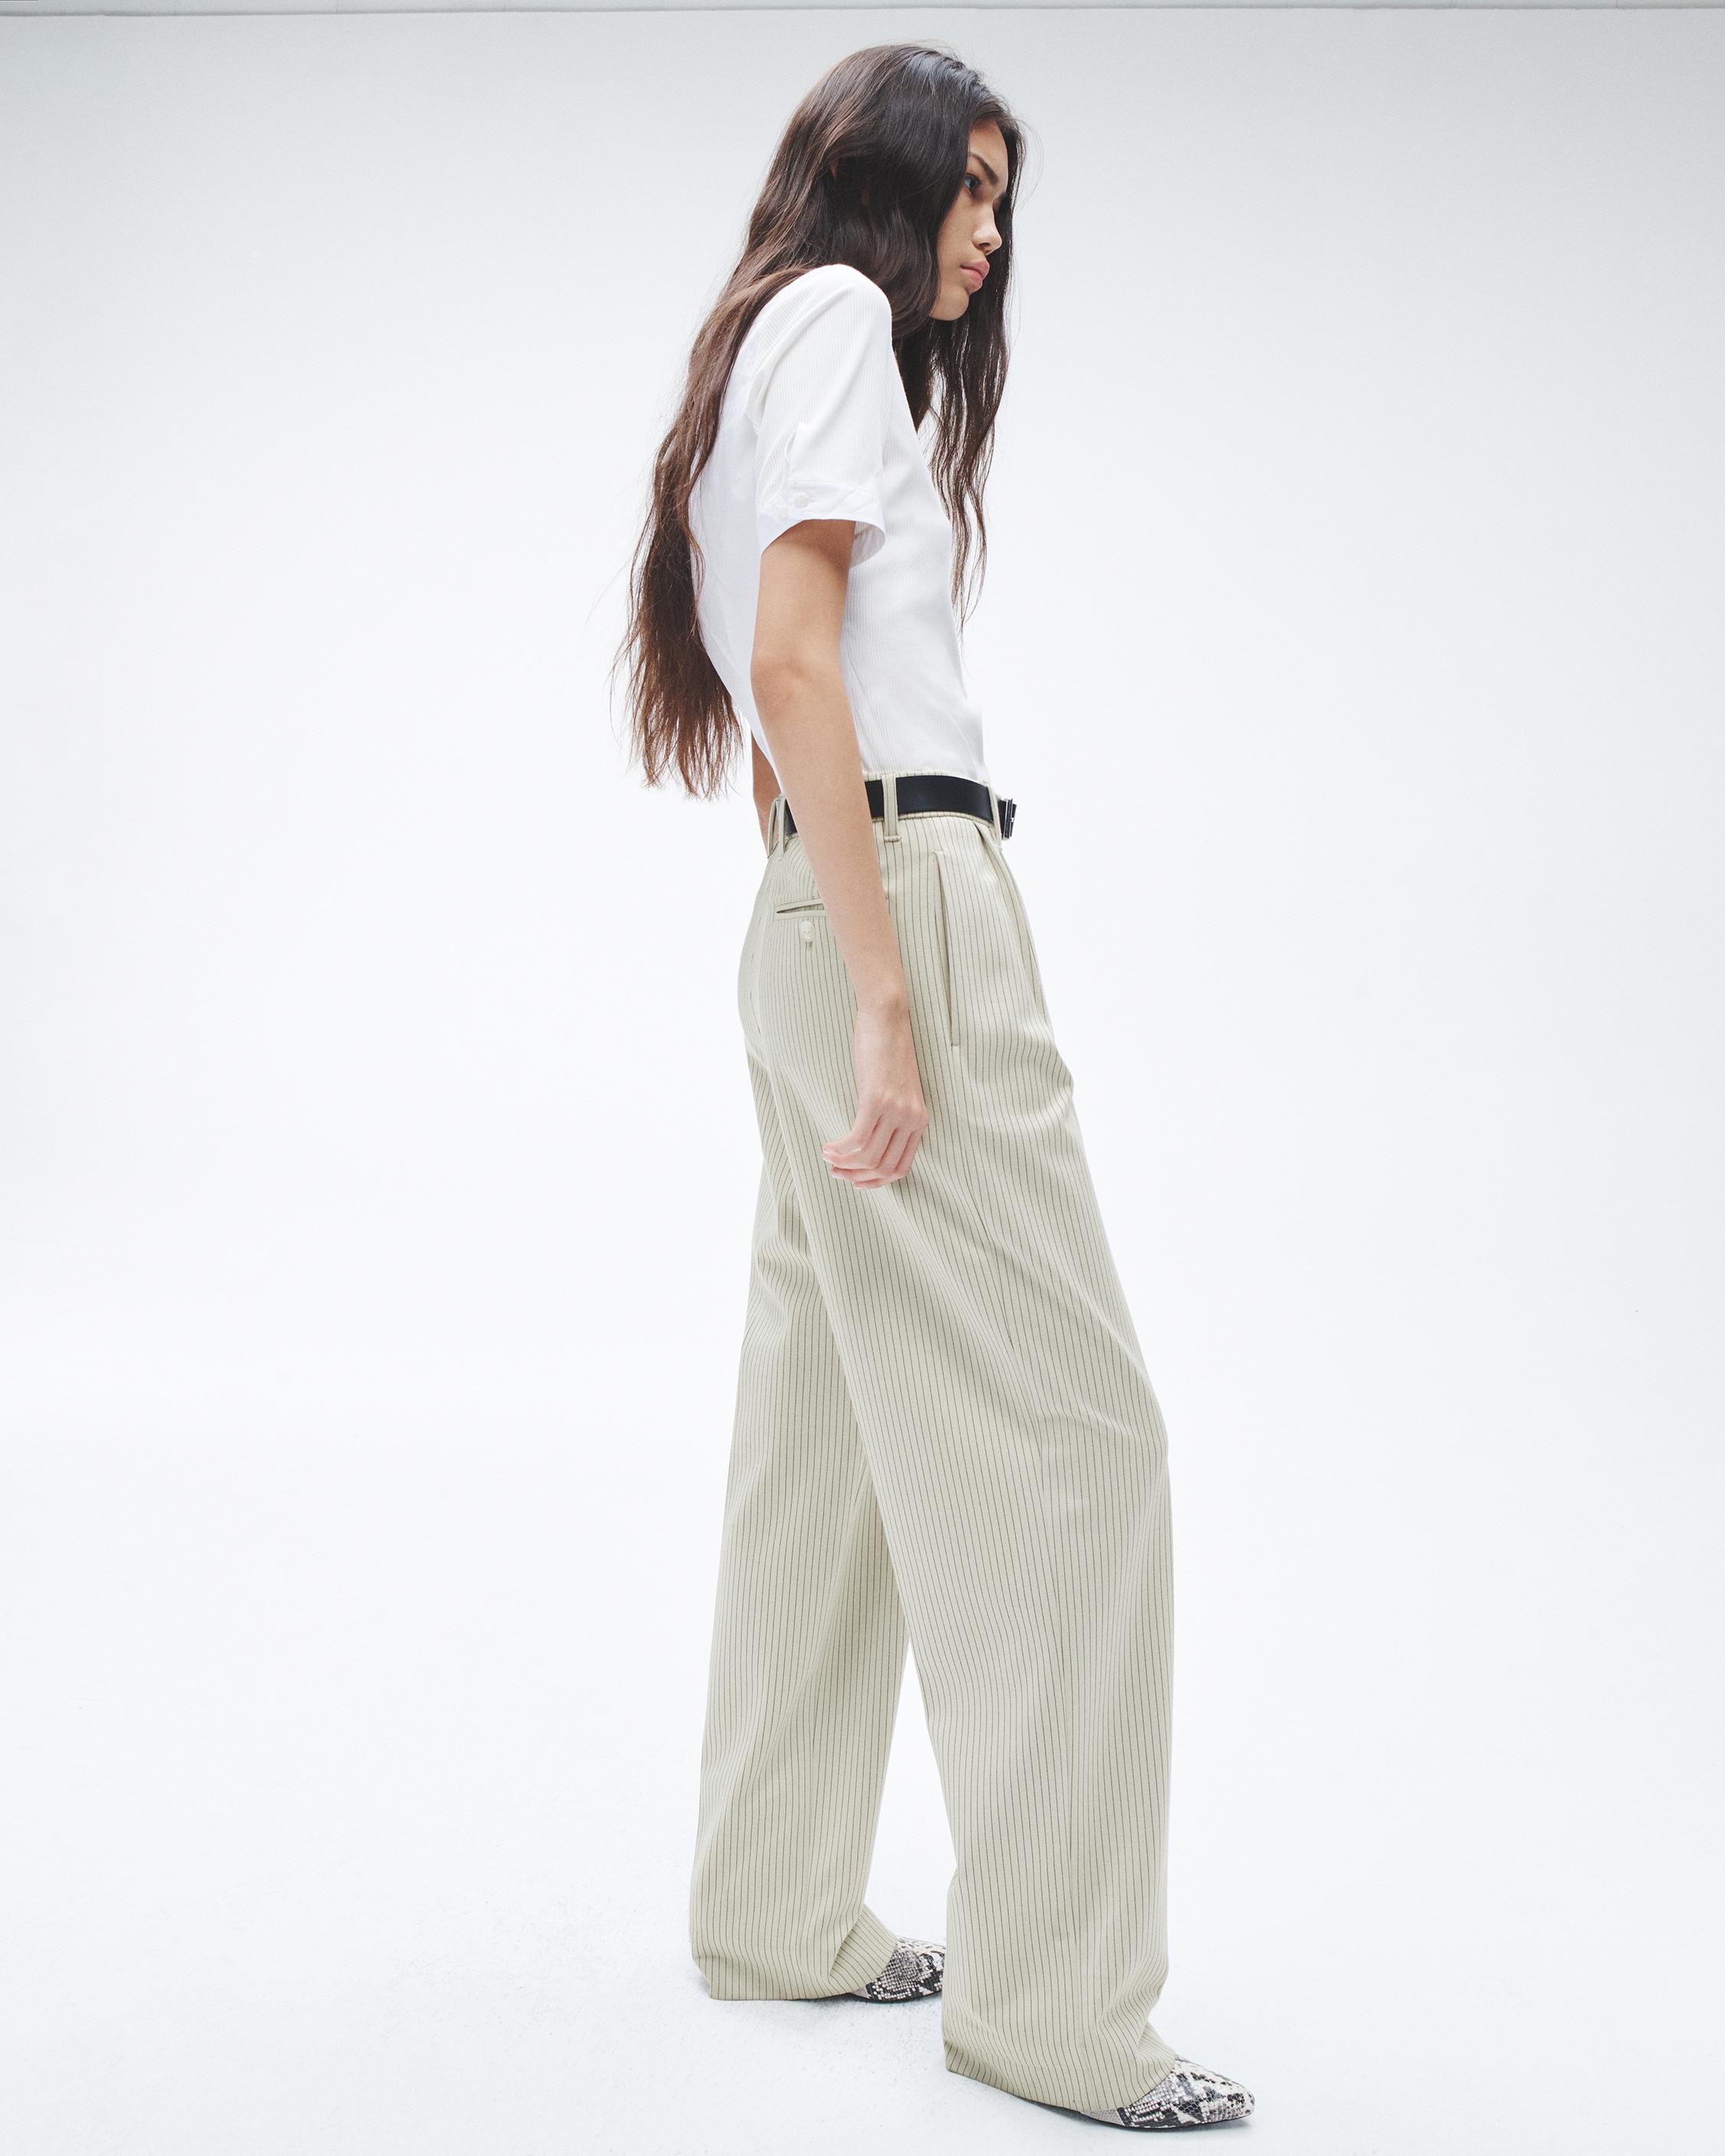 Marianne Ponte Pant
Relaxed Fit - 3